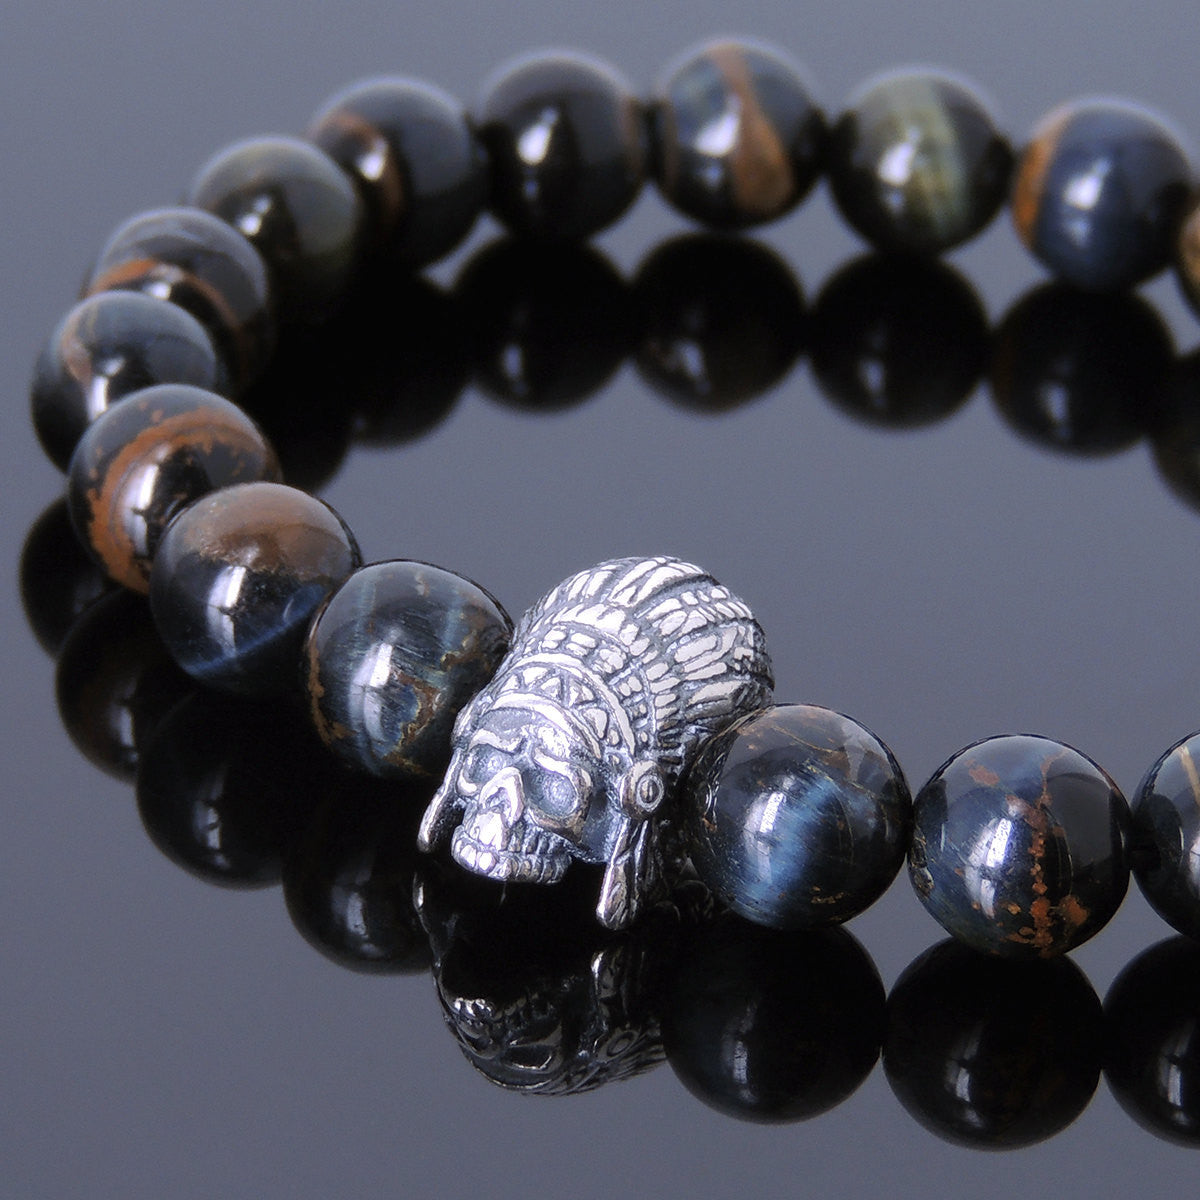 8mm Rare Mixed Blue Tiger Eye Healing Gemstone Bracelet with S925 Sterling Silver Courage Indian Skull Bead - Handmade by Gem & Silver BR586